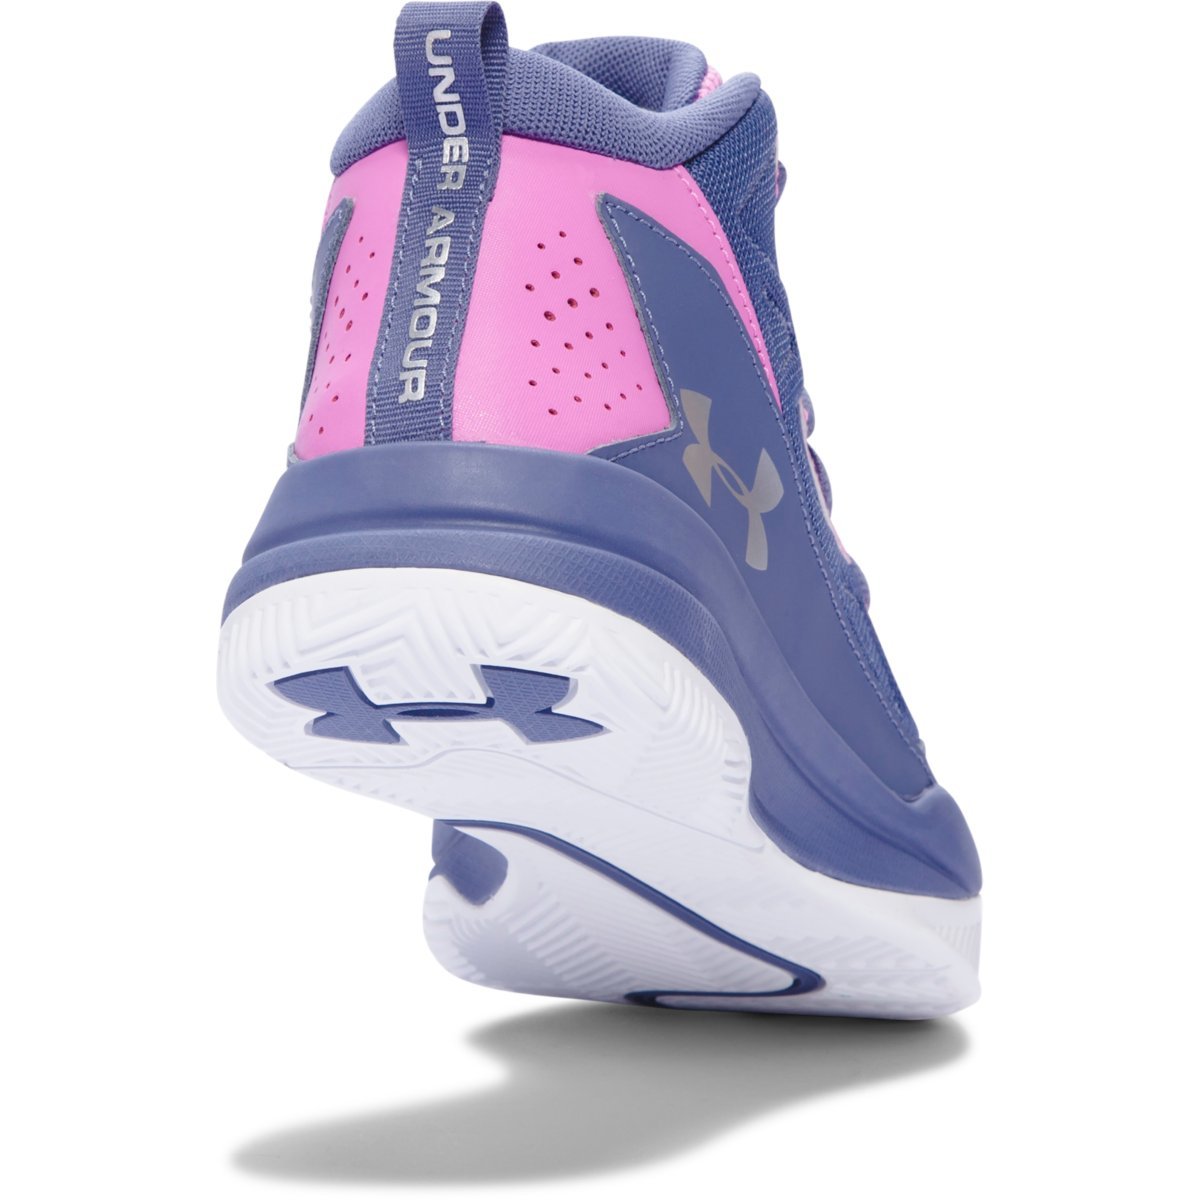 under armour girls basketball sneakers